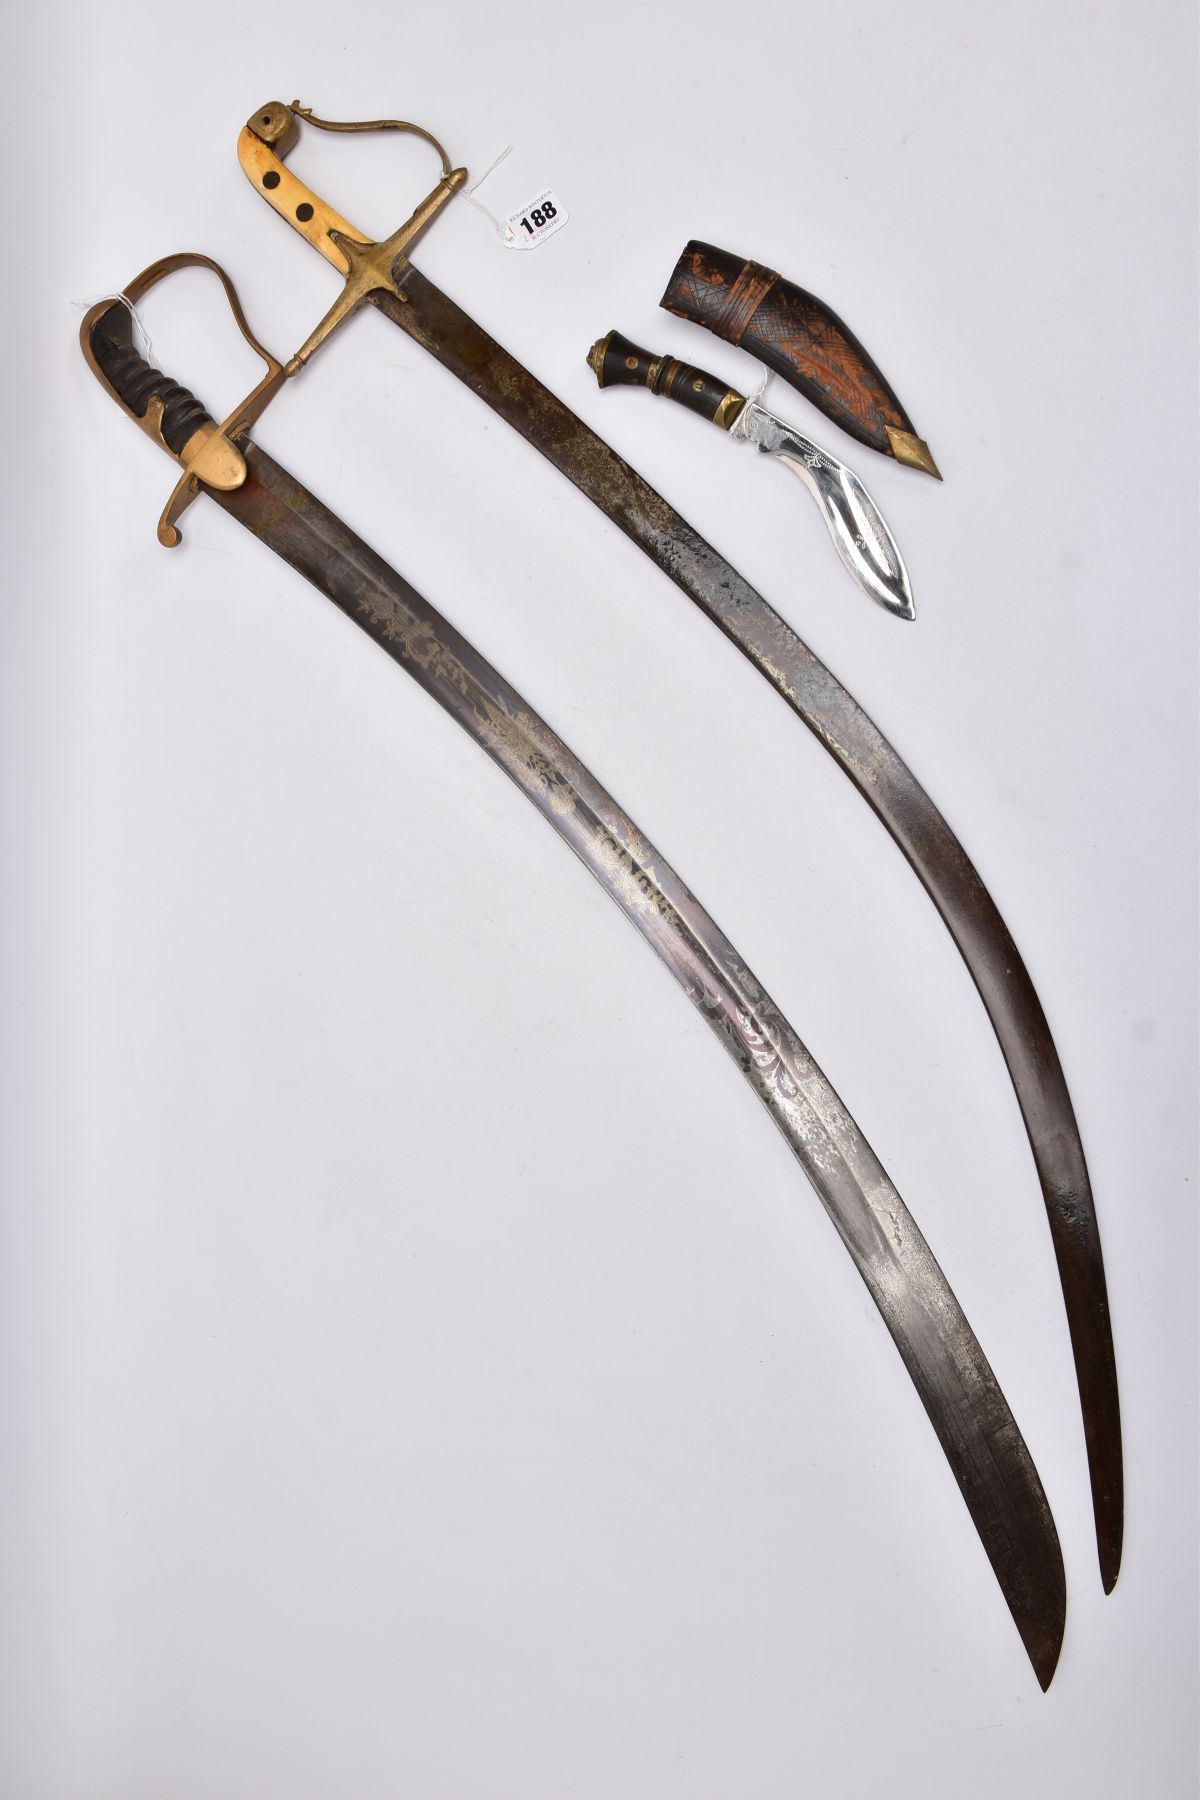 TWO LONG CURVED BLADE SWORDS, Eastern in design and looks, blade on one has been lacquered, etched